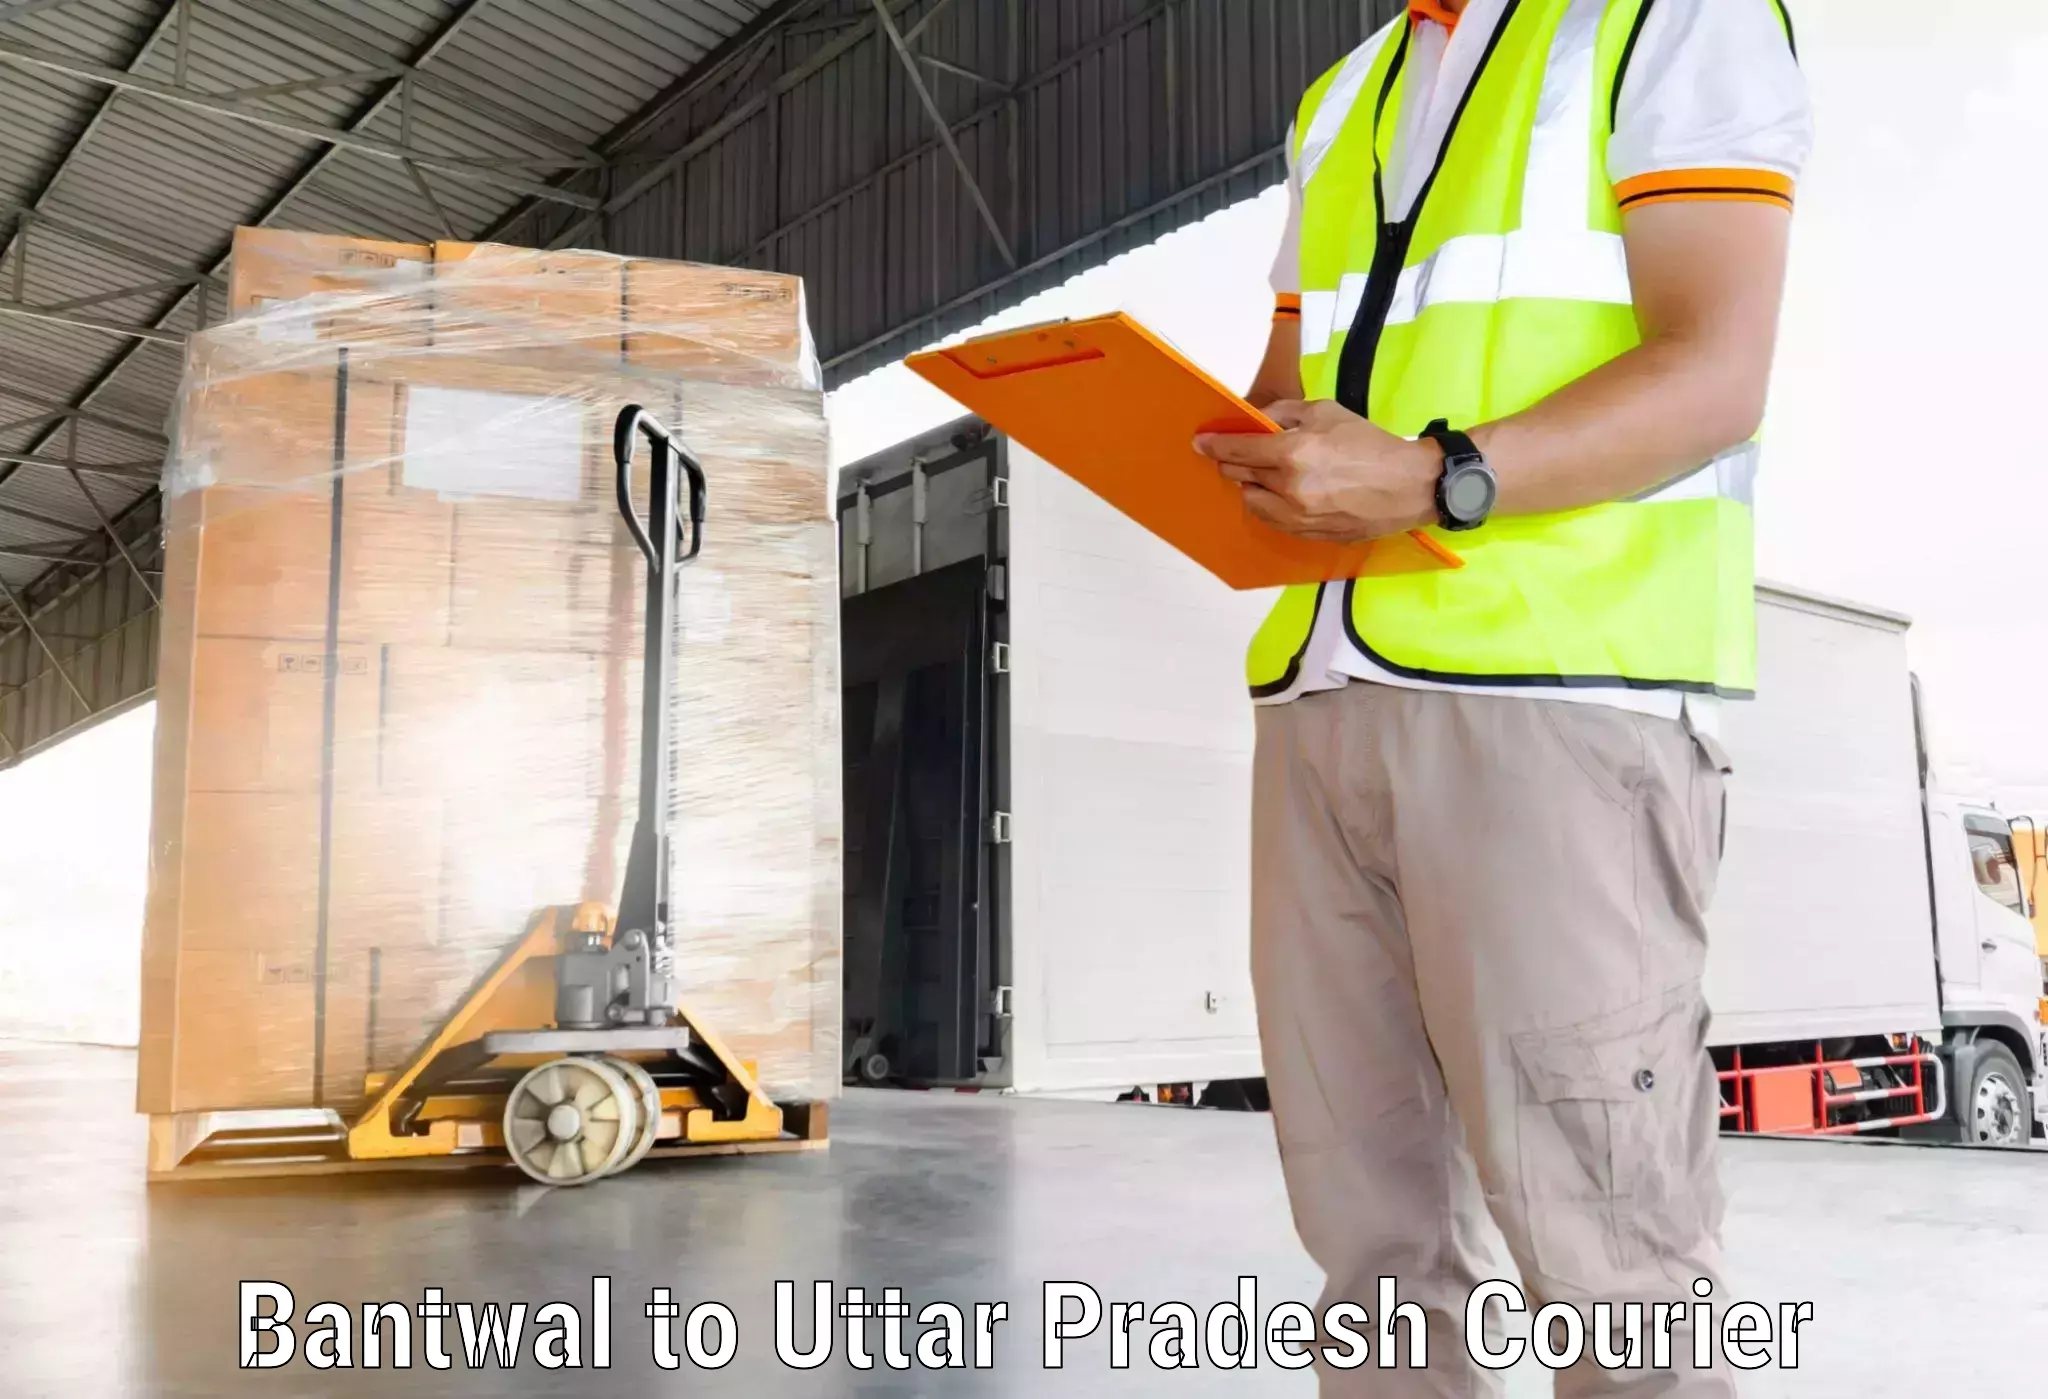 Automated parcel services Bantwal to Malihabad